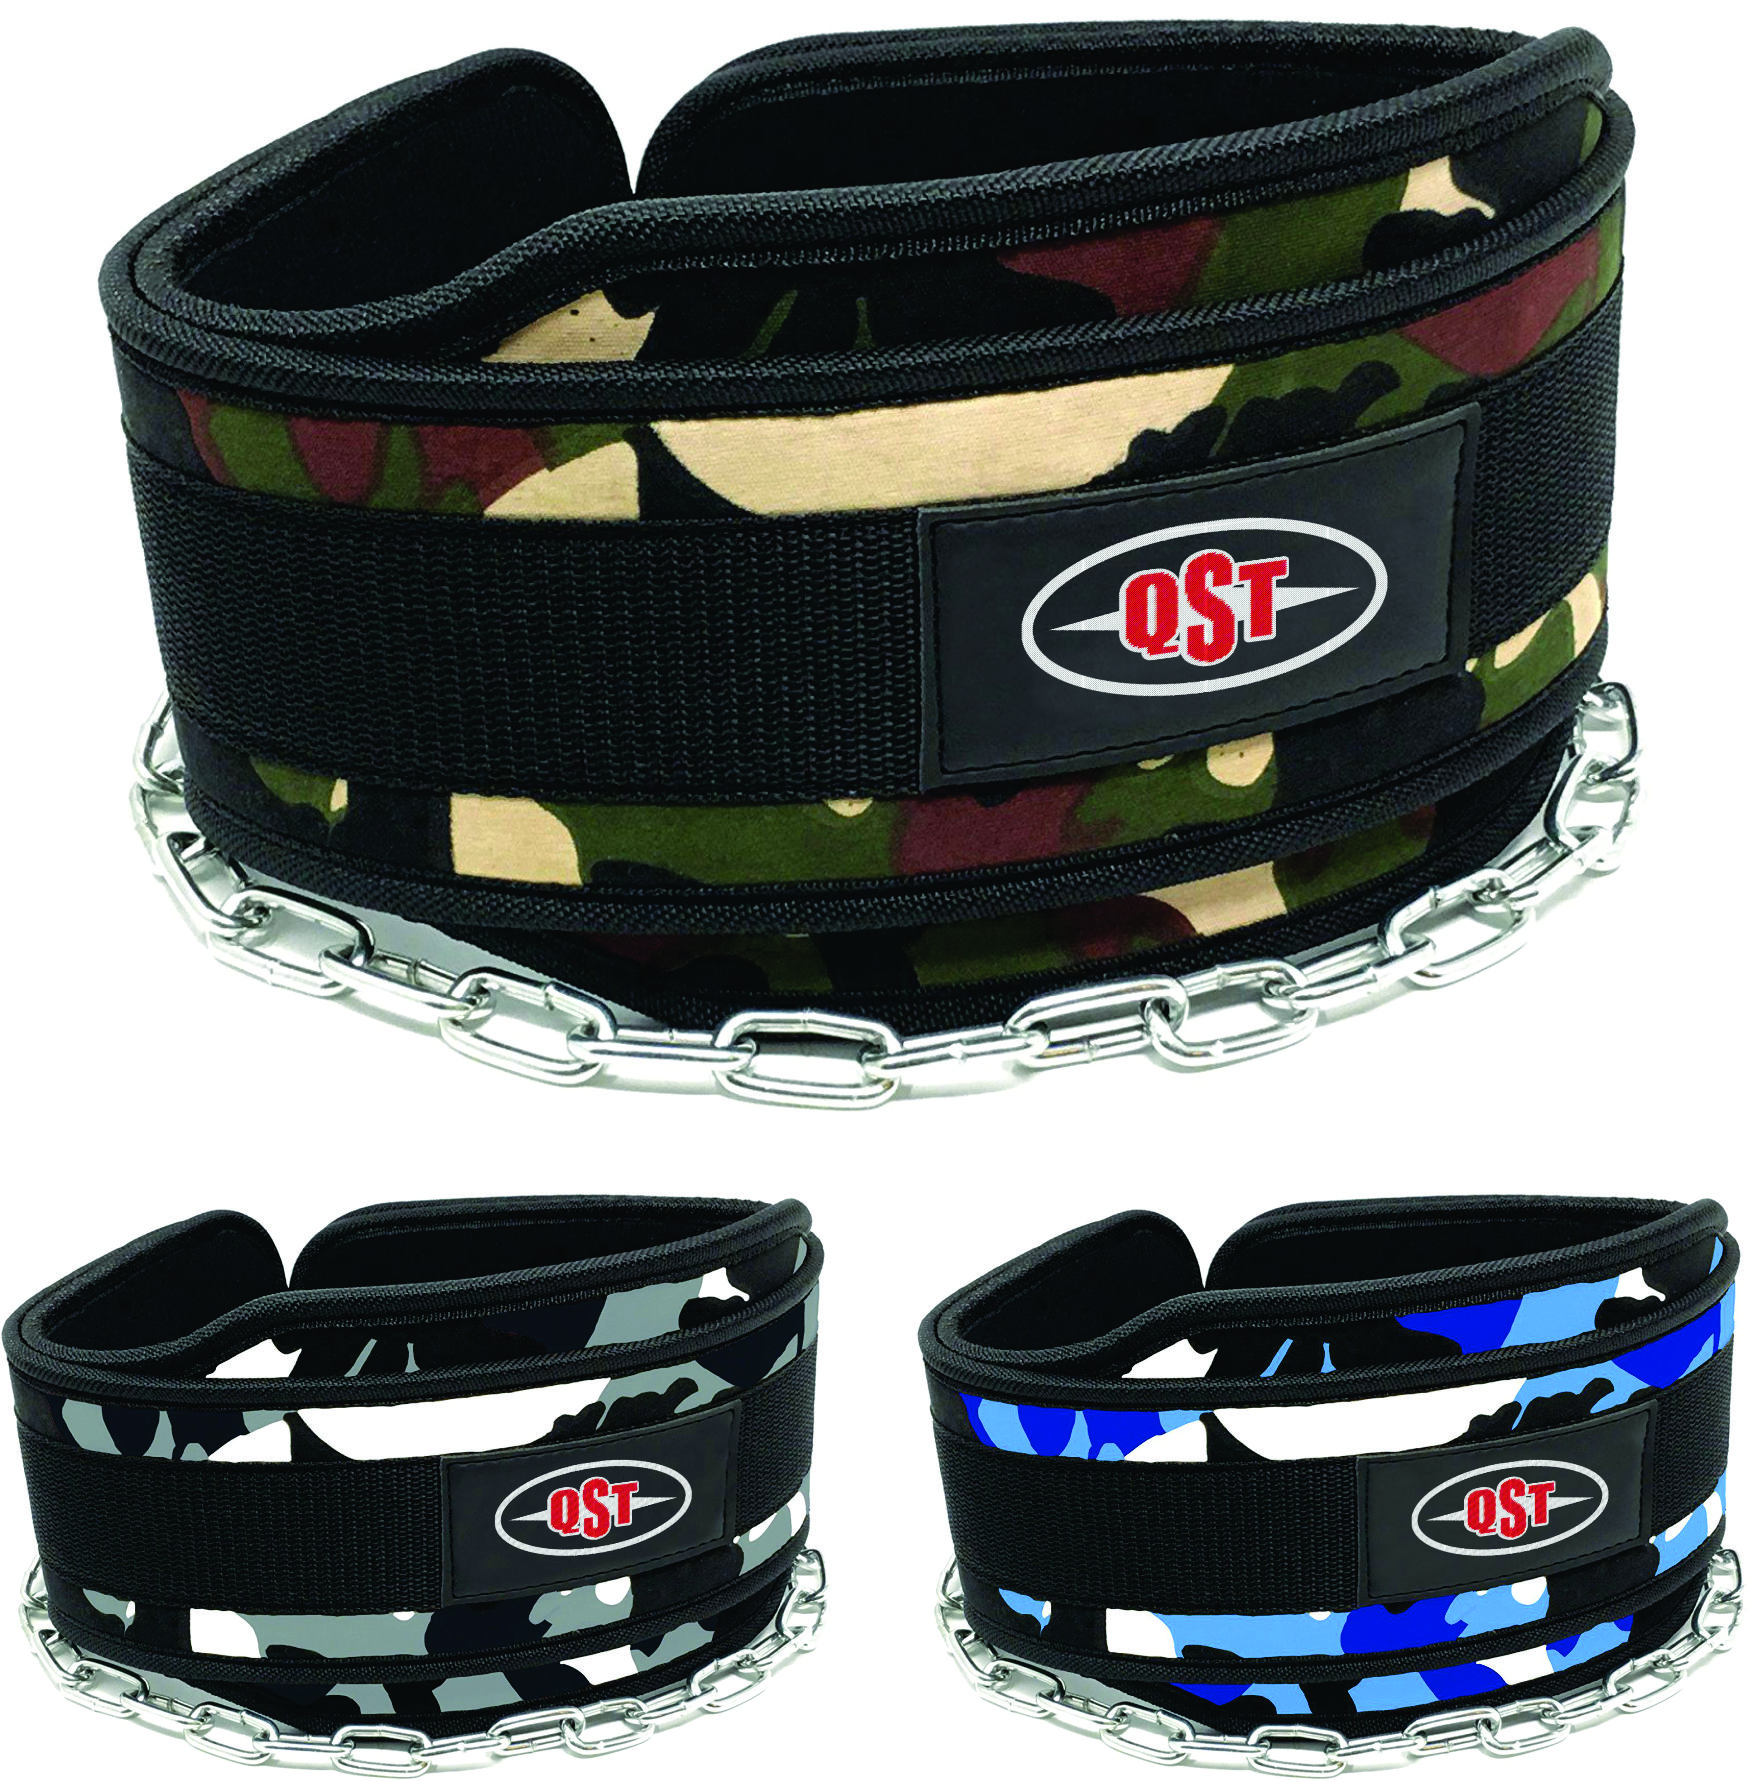 4FIT NEOPRENE DIPPING BELT/ WEIGHT LIFTING/ GYM DIP BELT WITH METAL CHAIN 